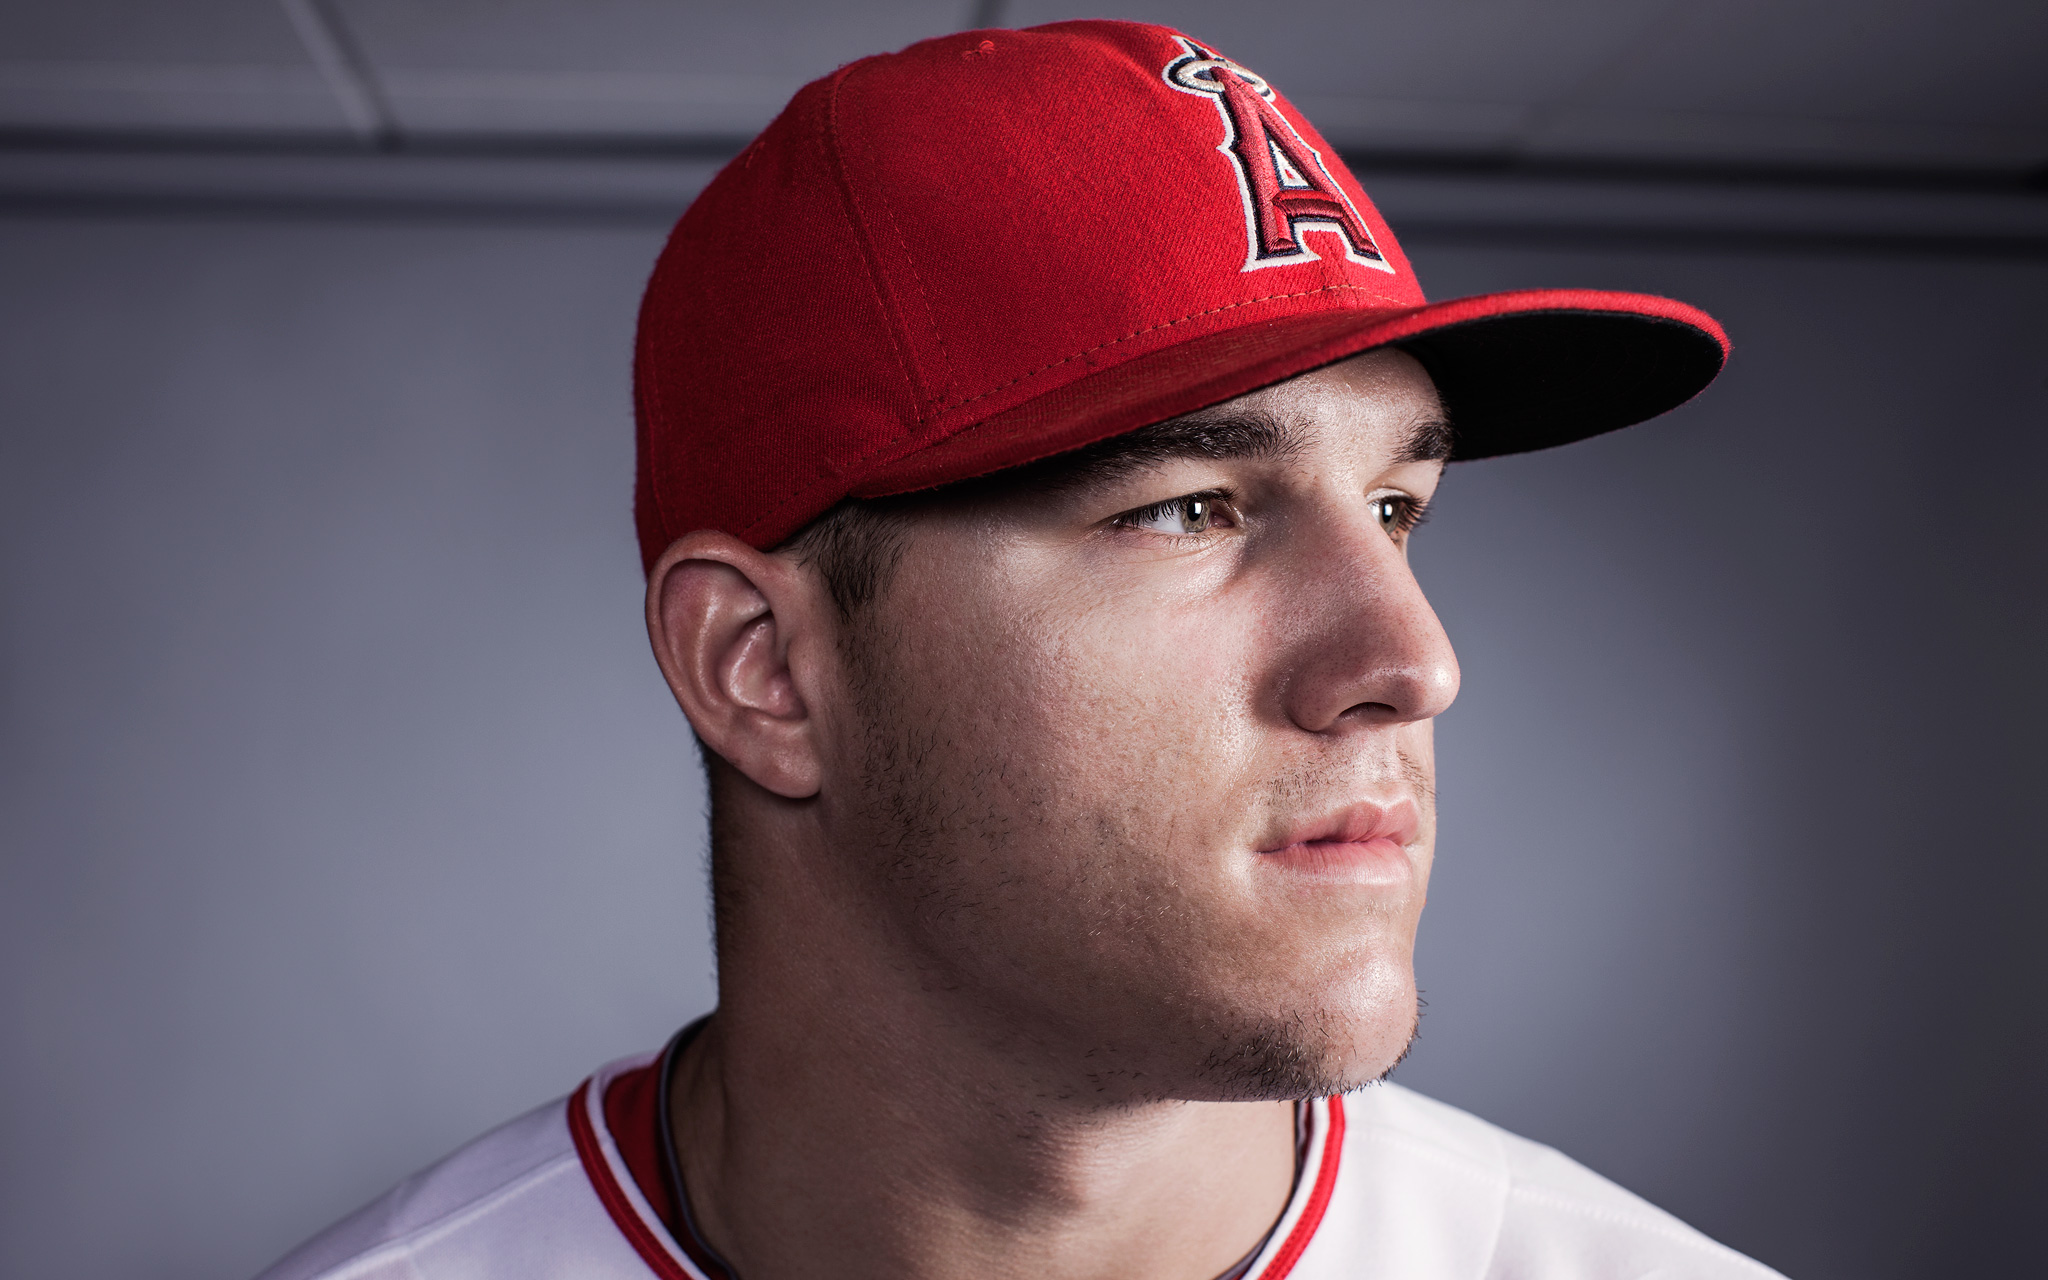 Mike Trout Face - HD Wallpaper 